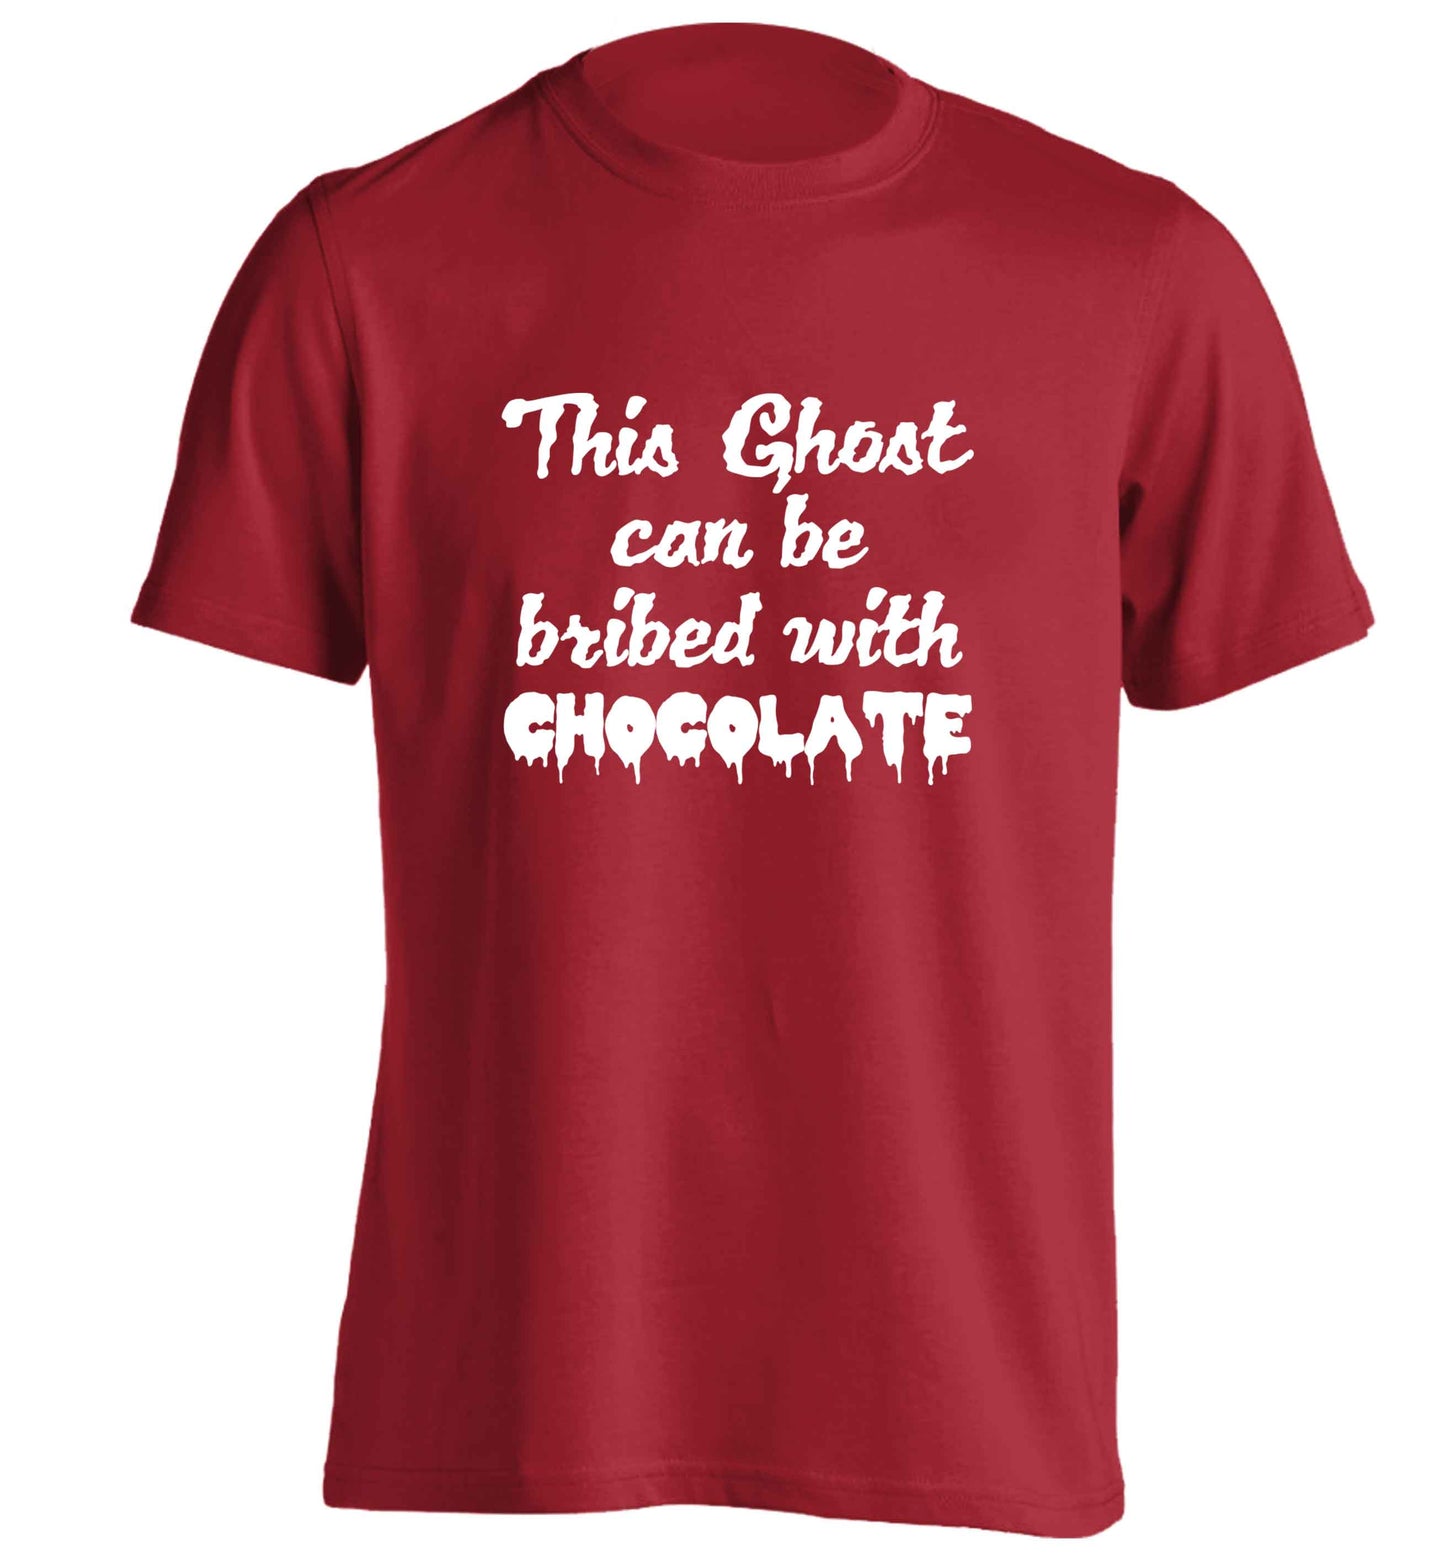 This ghost can be bribed with chocolate adults unisex red Tshirt 2XL